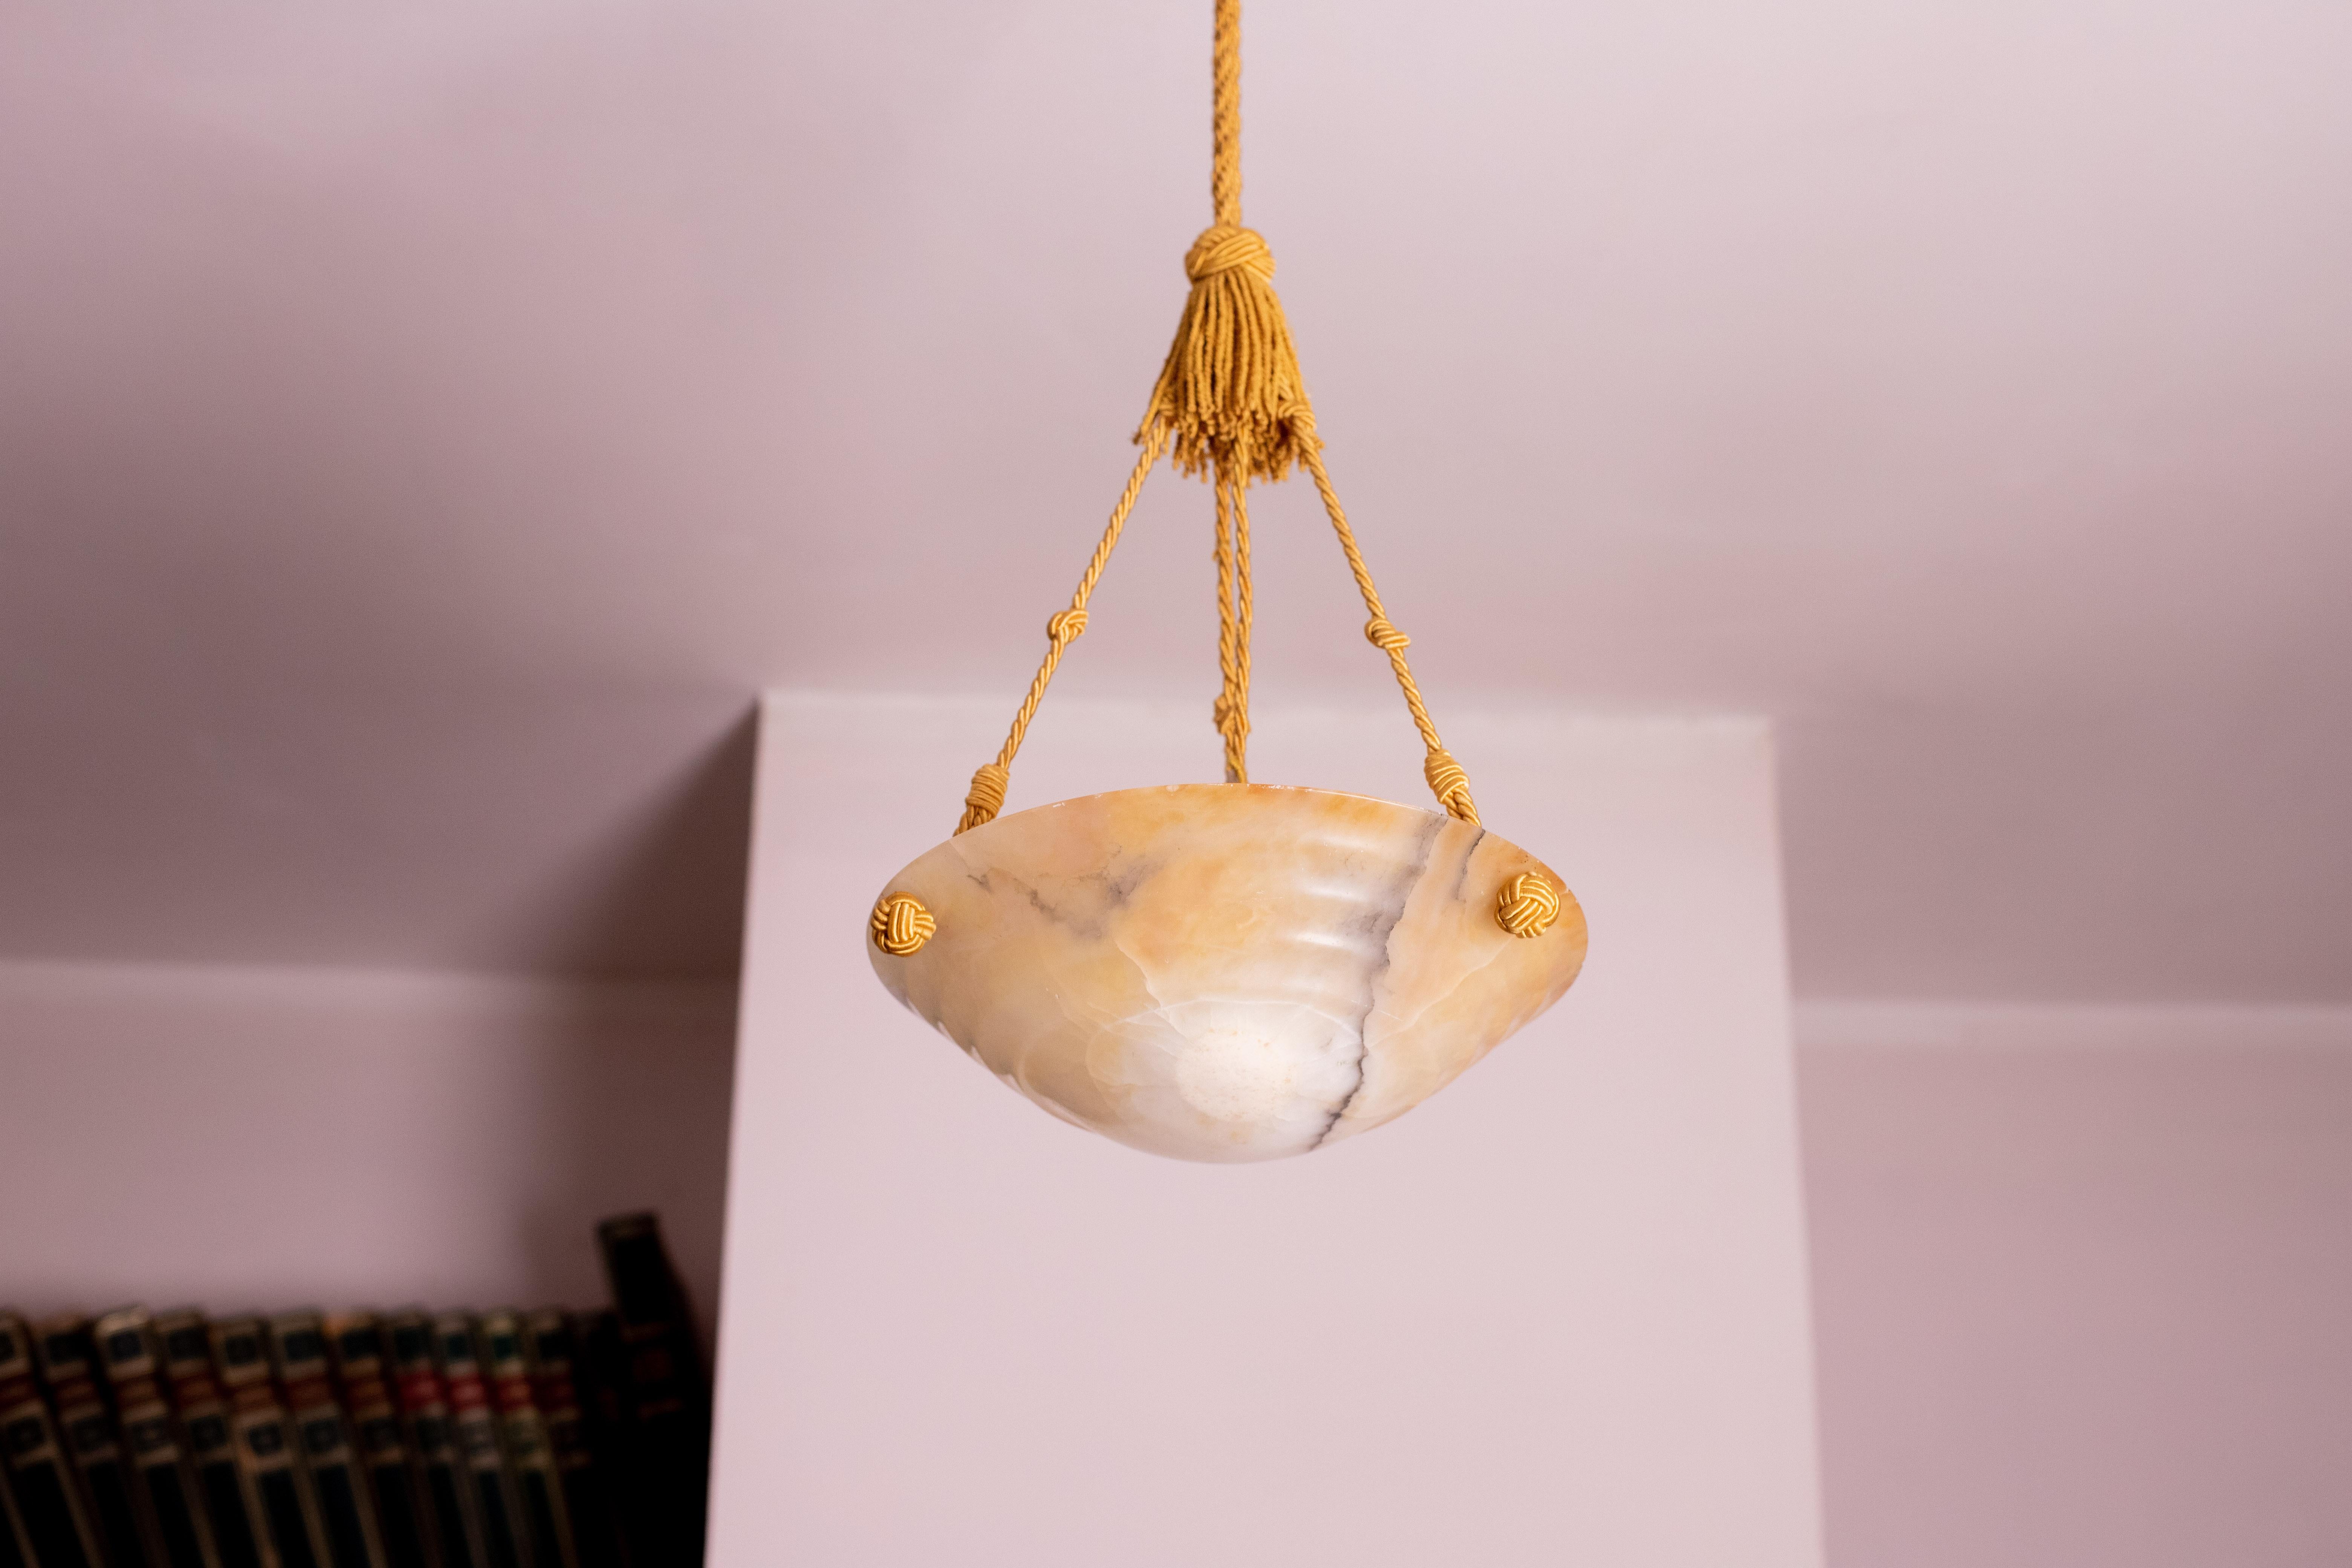 Antique alabaster hanging chandelier in Art Deco style, circa 1940s.
A unique alabaster piece, beautifully crafted with shades and reflections of other colors when lit, suspended by three strings (wires).
The light that shines through the